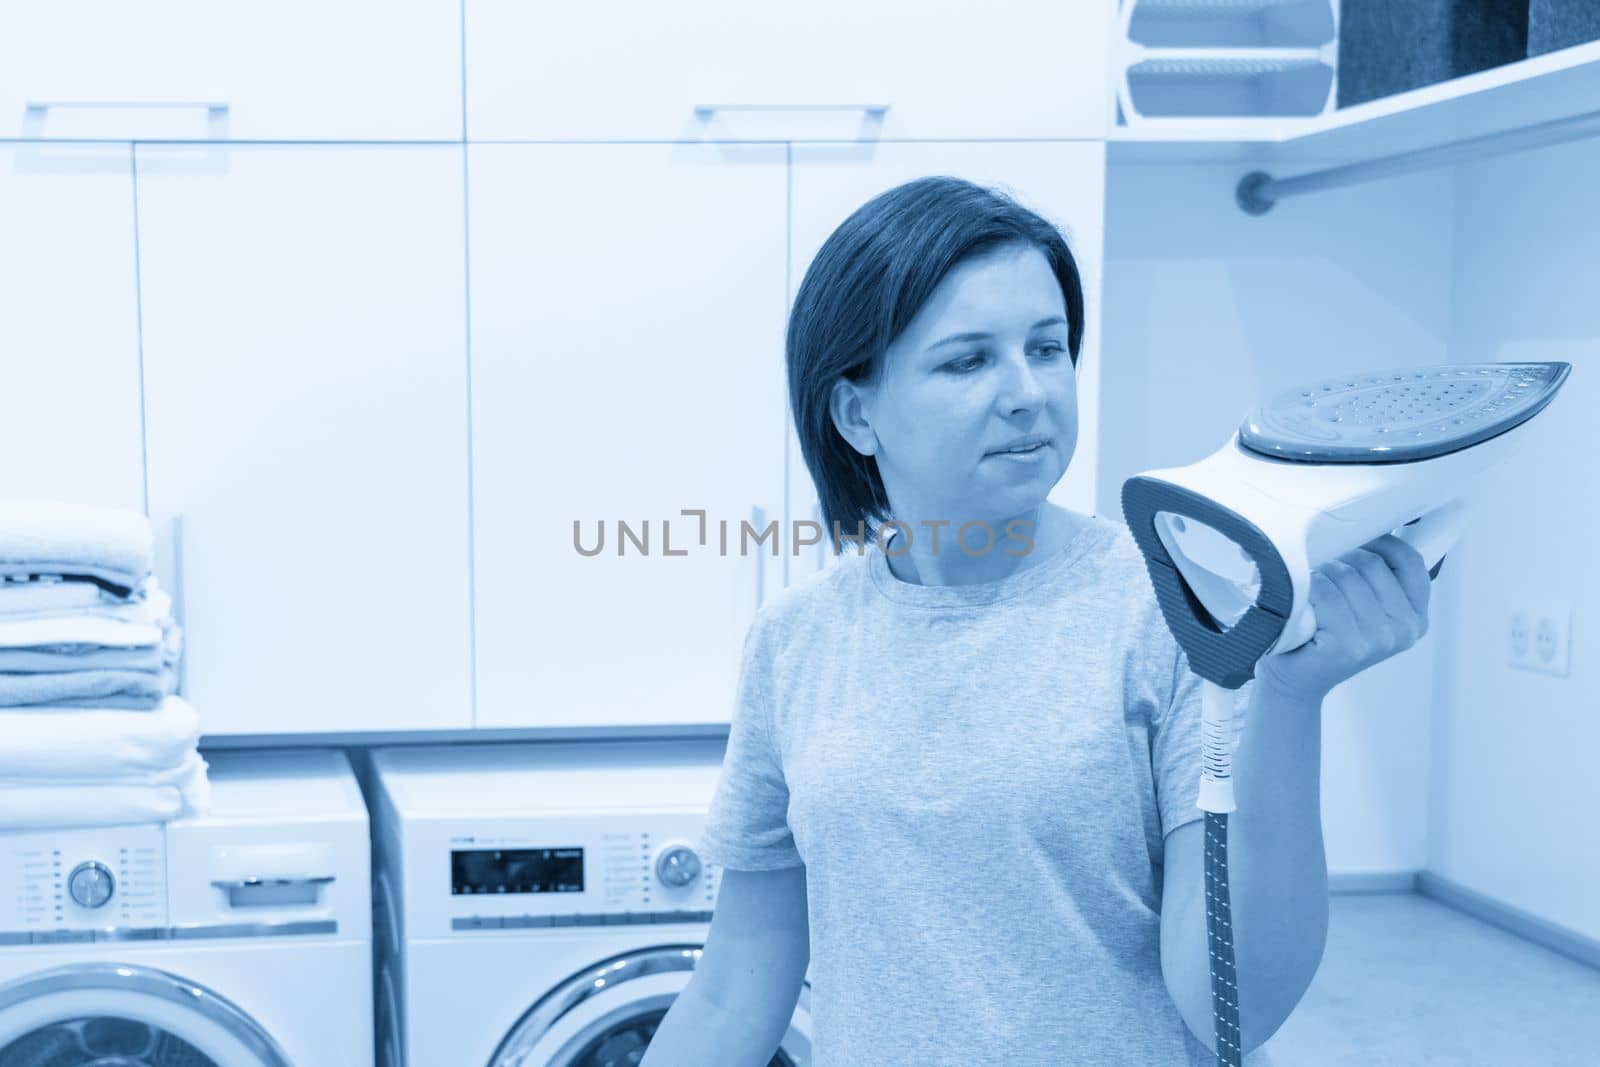 Woman ironing white shirt on board in laundry room with washing machine on background by Mariakray